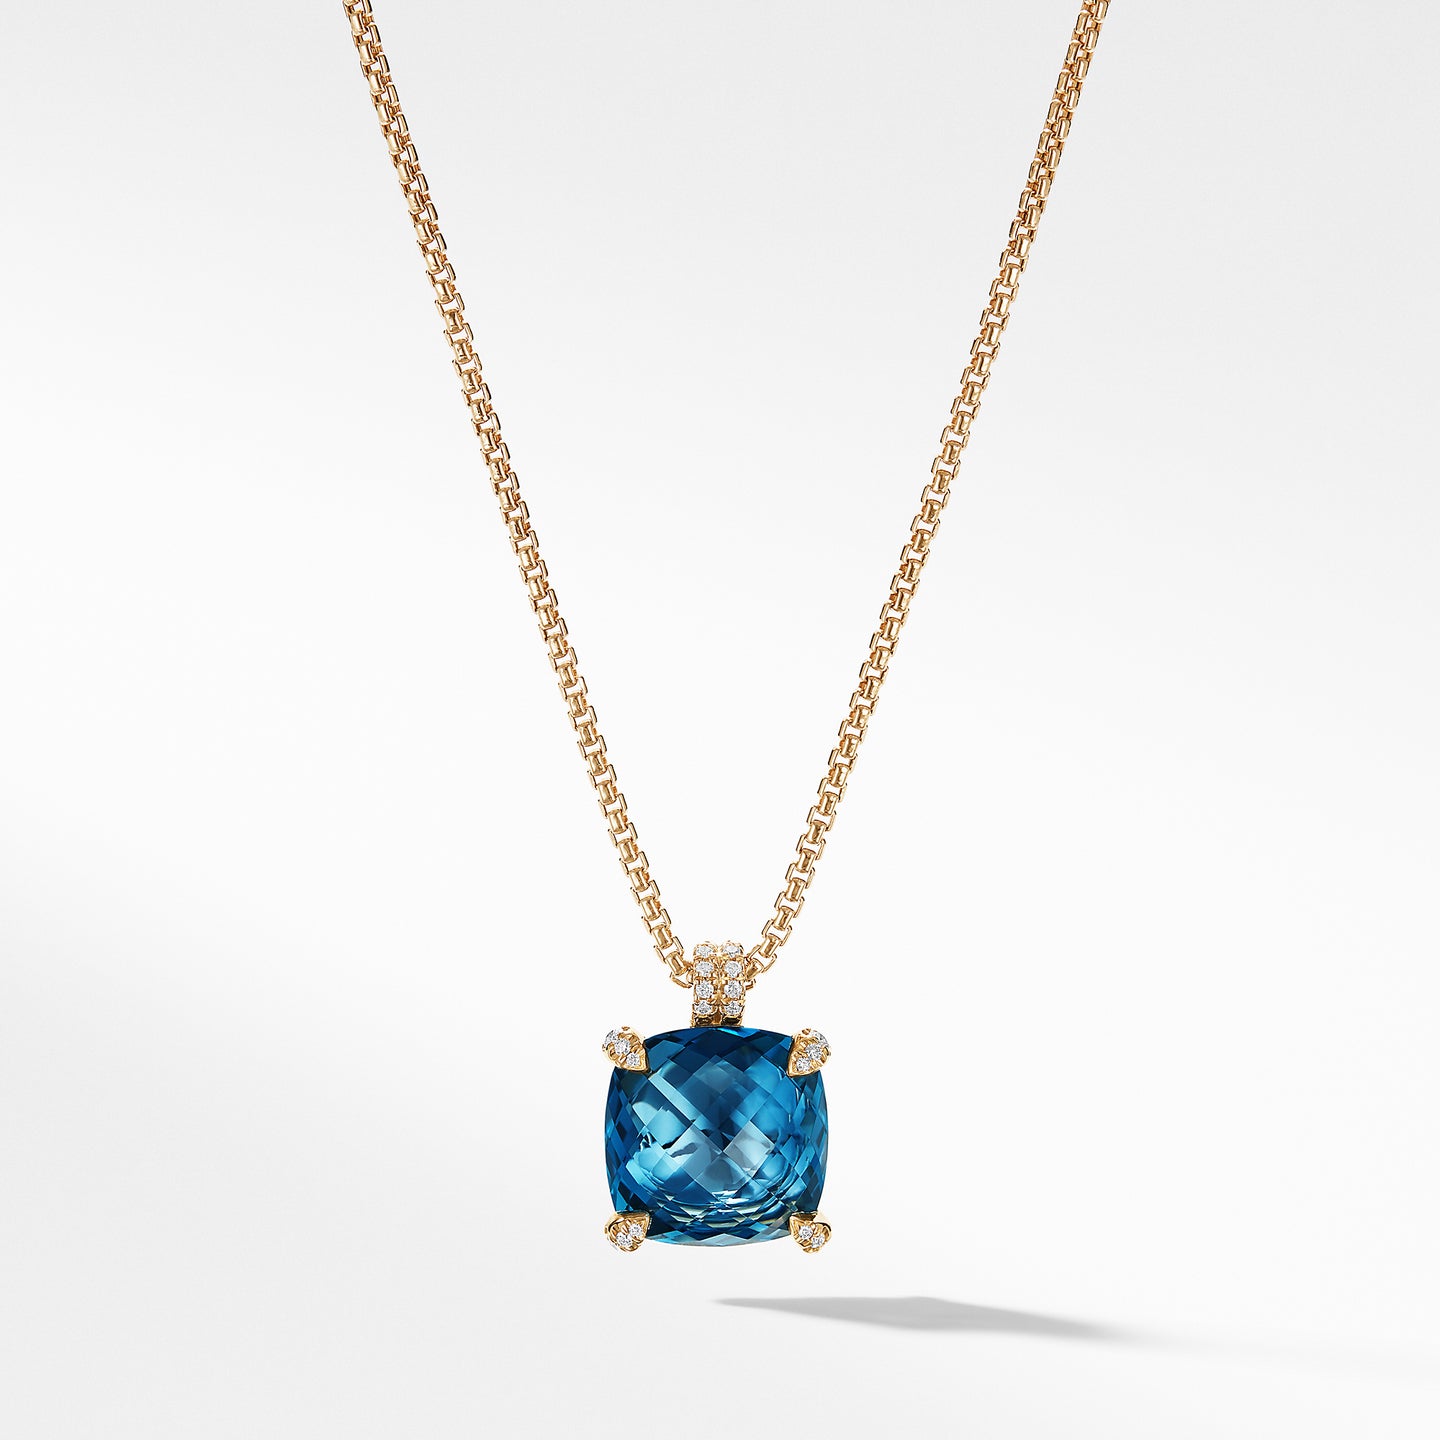 Pendant Necklace with Hampton Blue Topaz and Diamonds in 18K Gold, 18